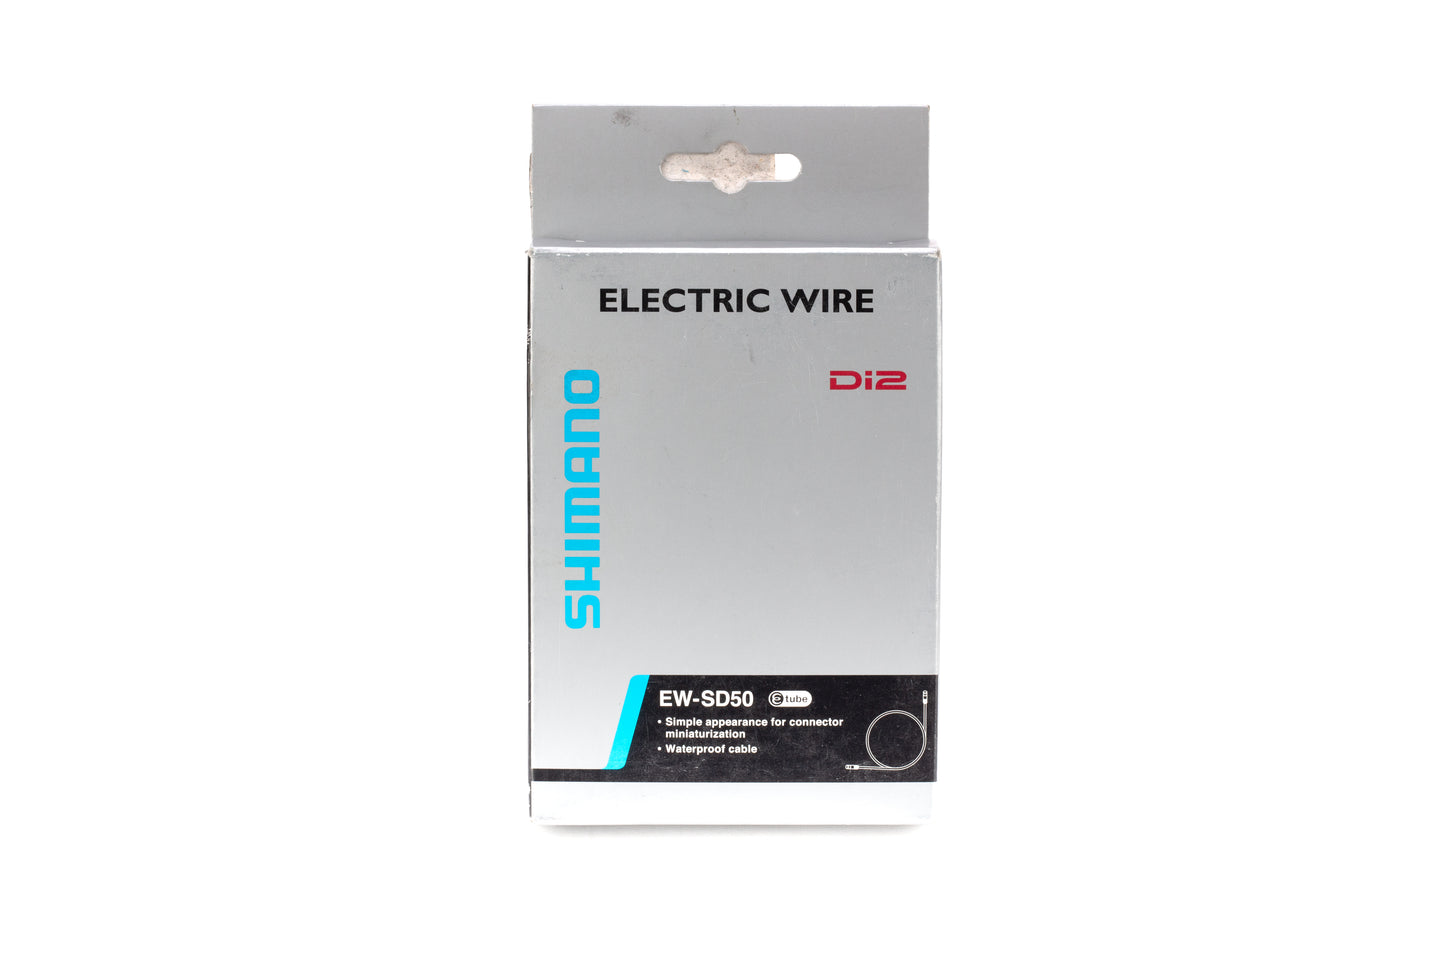 Shimano E-Tube Wires and Connectors